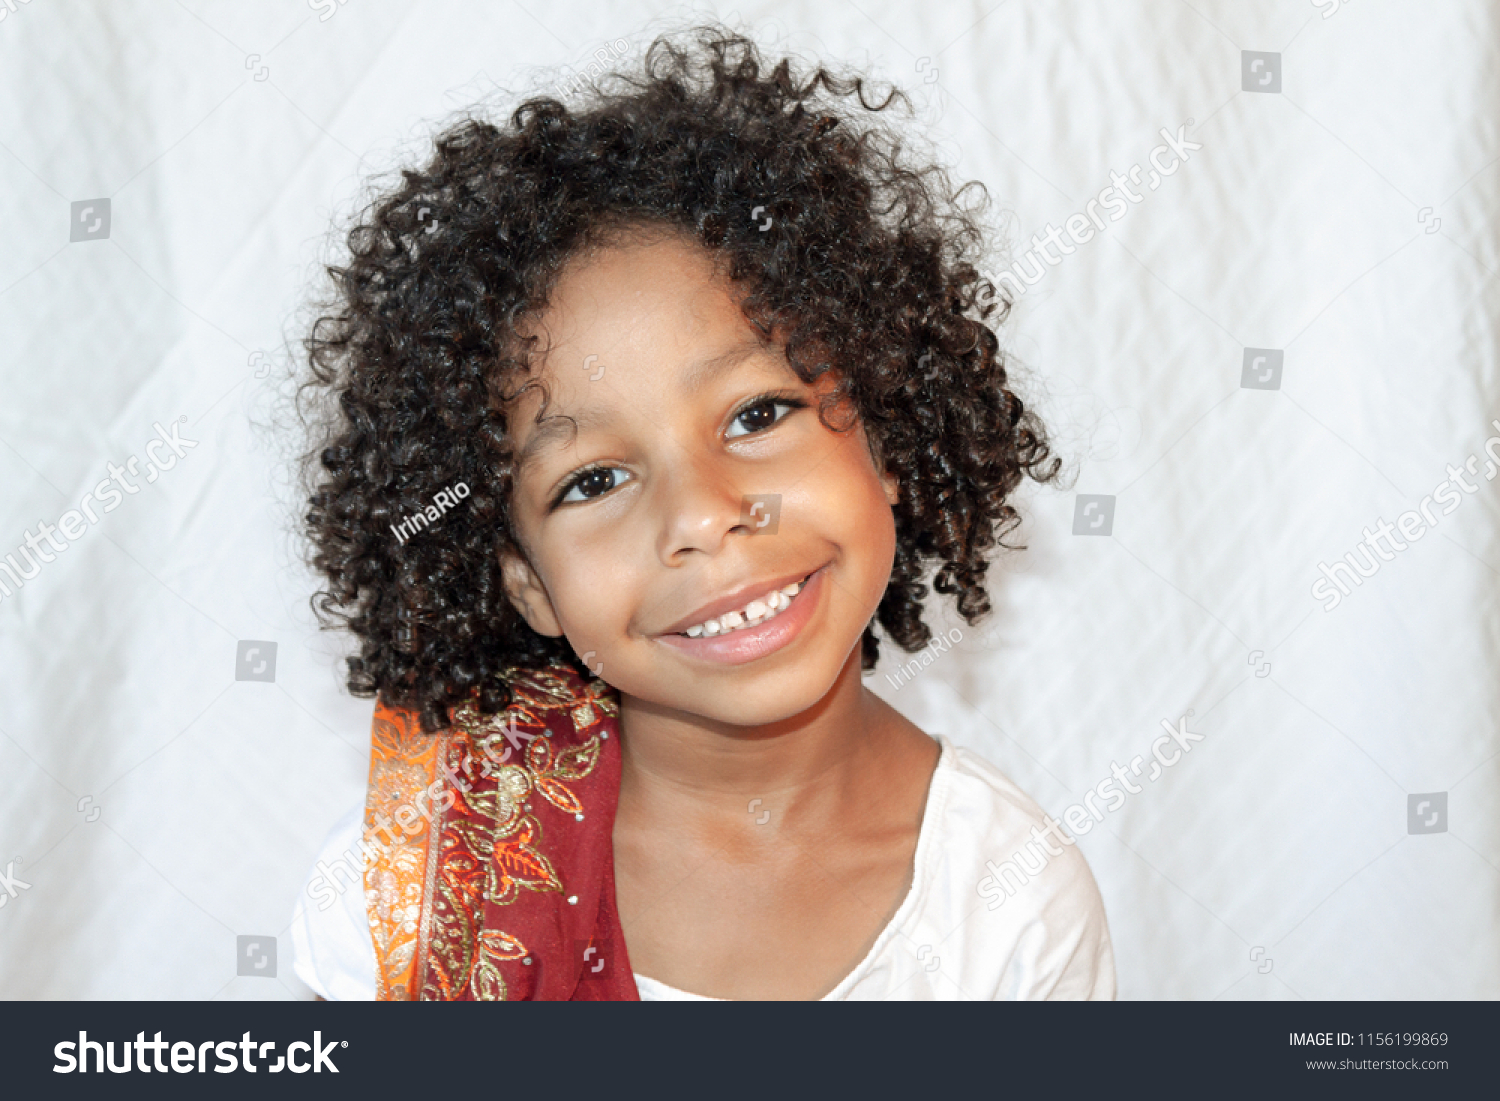 Portrait Mixed Little Girl Curly Hair Stock Image Download Now